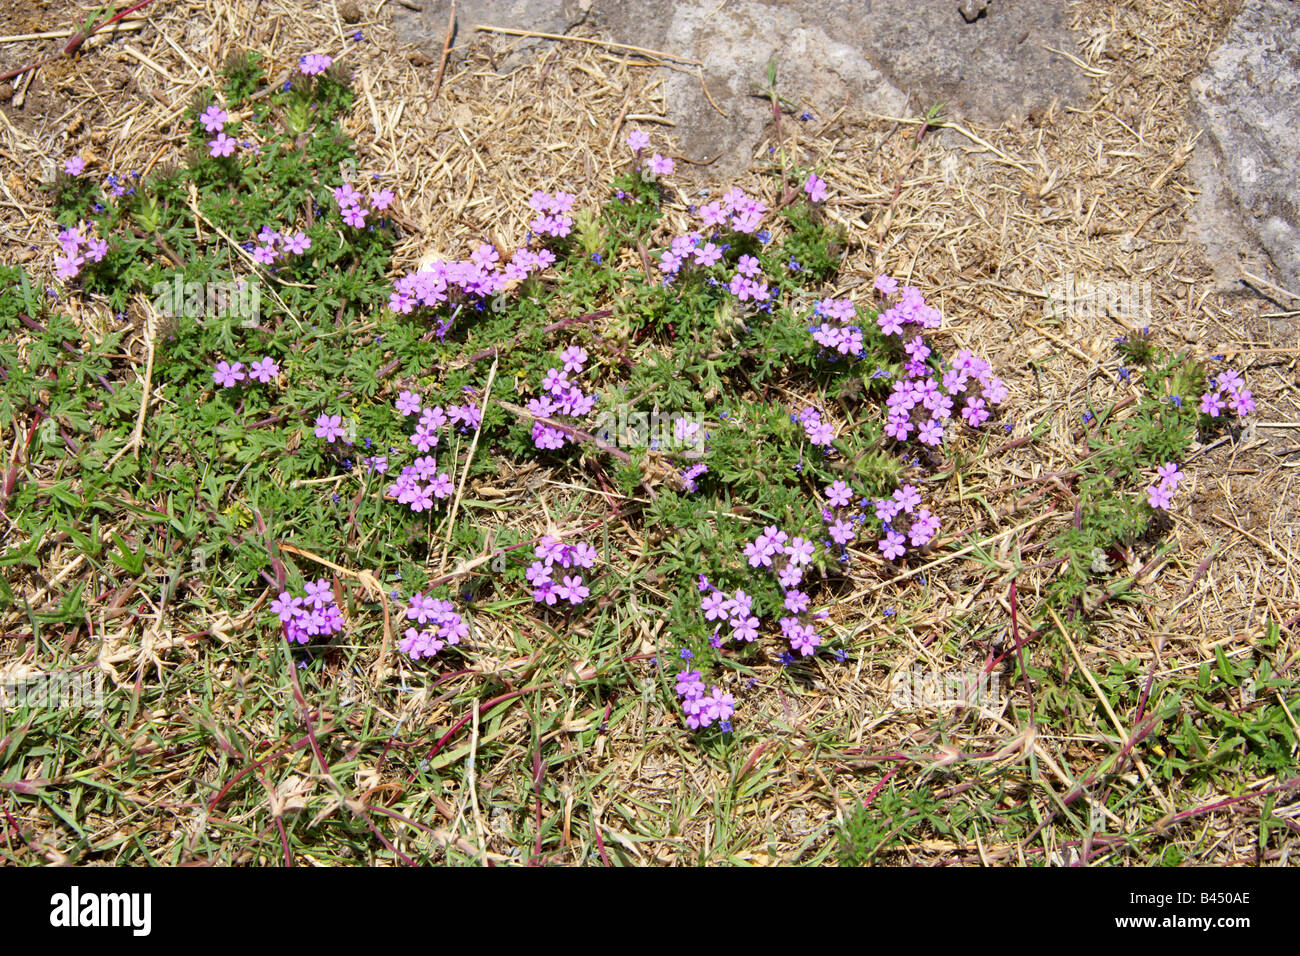 Mock Vervain or Mock Verbena, Glandularia dissecta, Verbenaceae. Wild Flowers at the Archeological Site of the Great Pyramid of Cholula, Mexico. Stock Photo